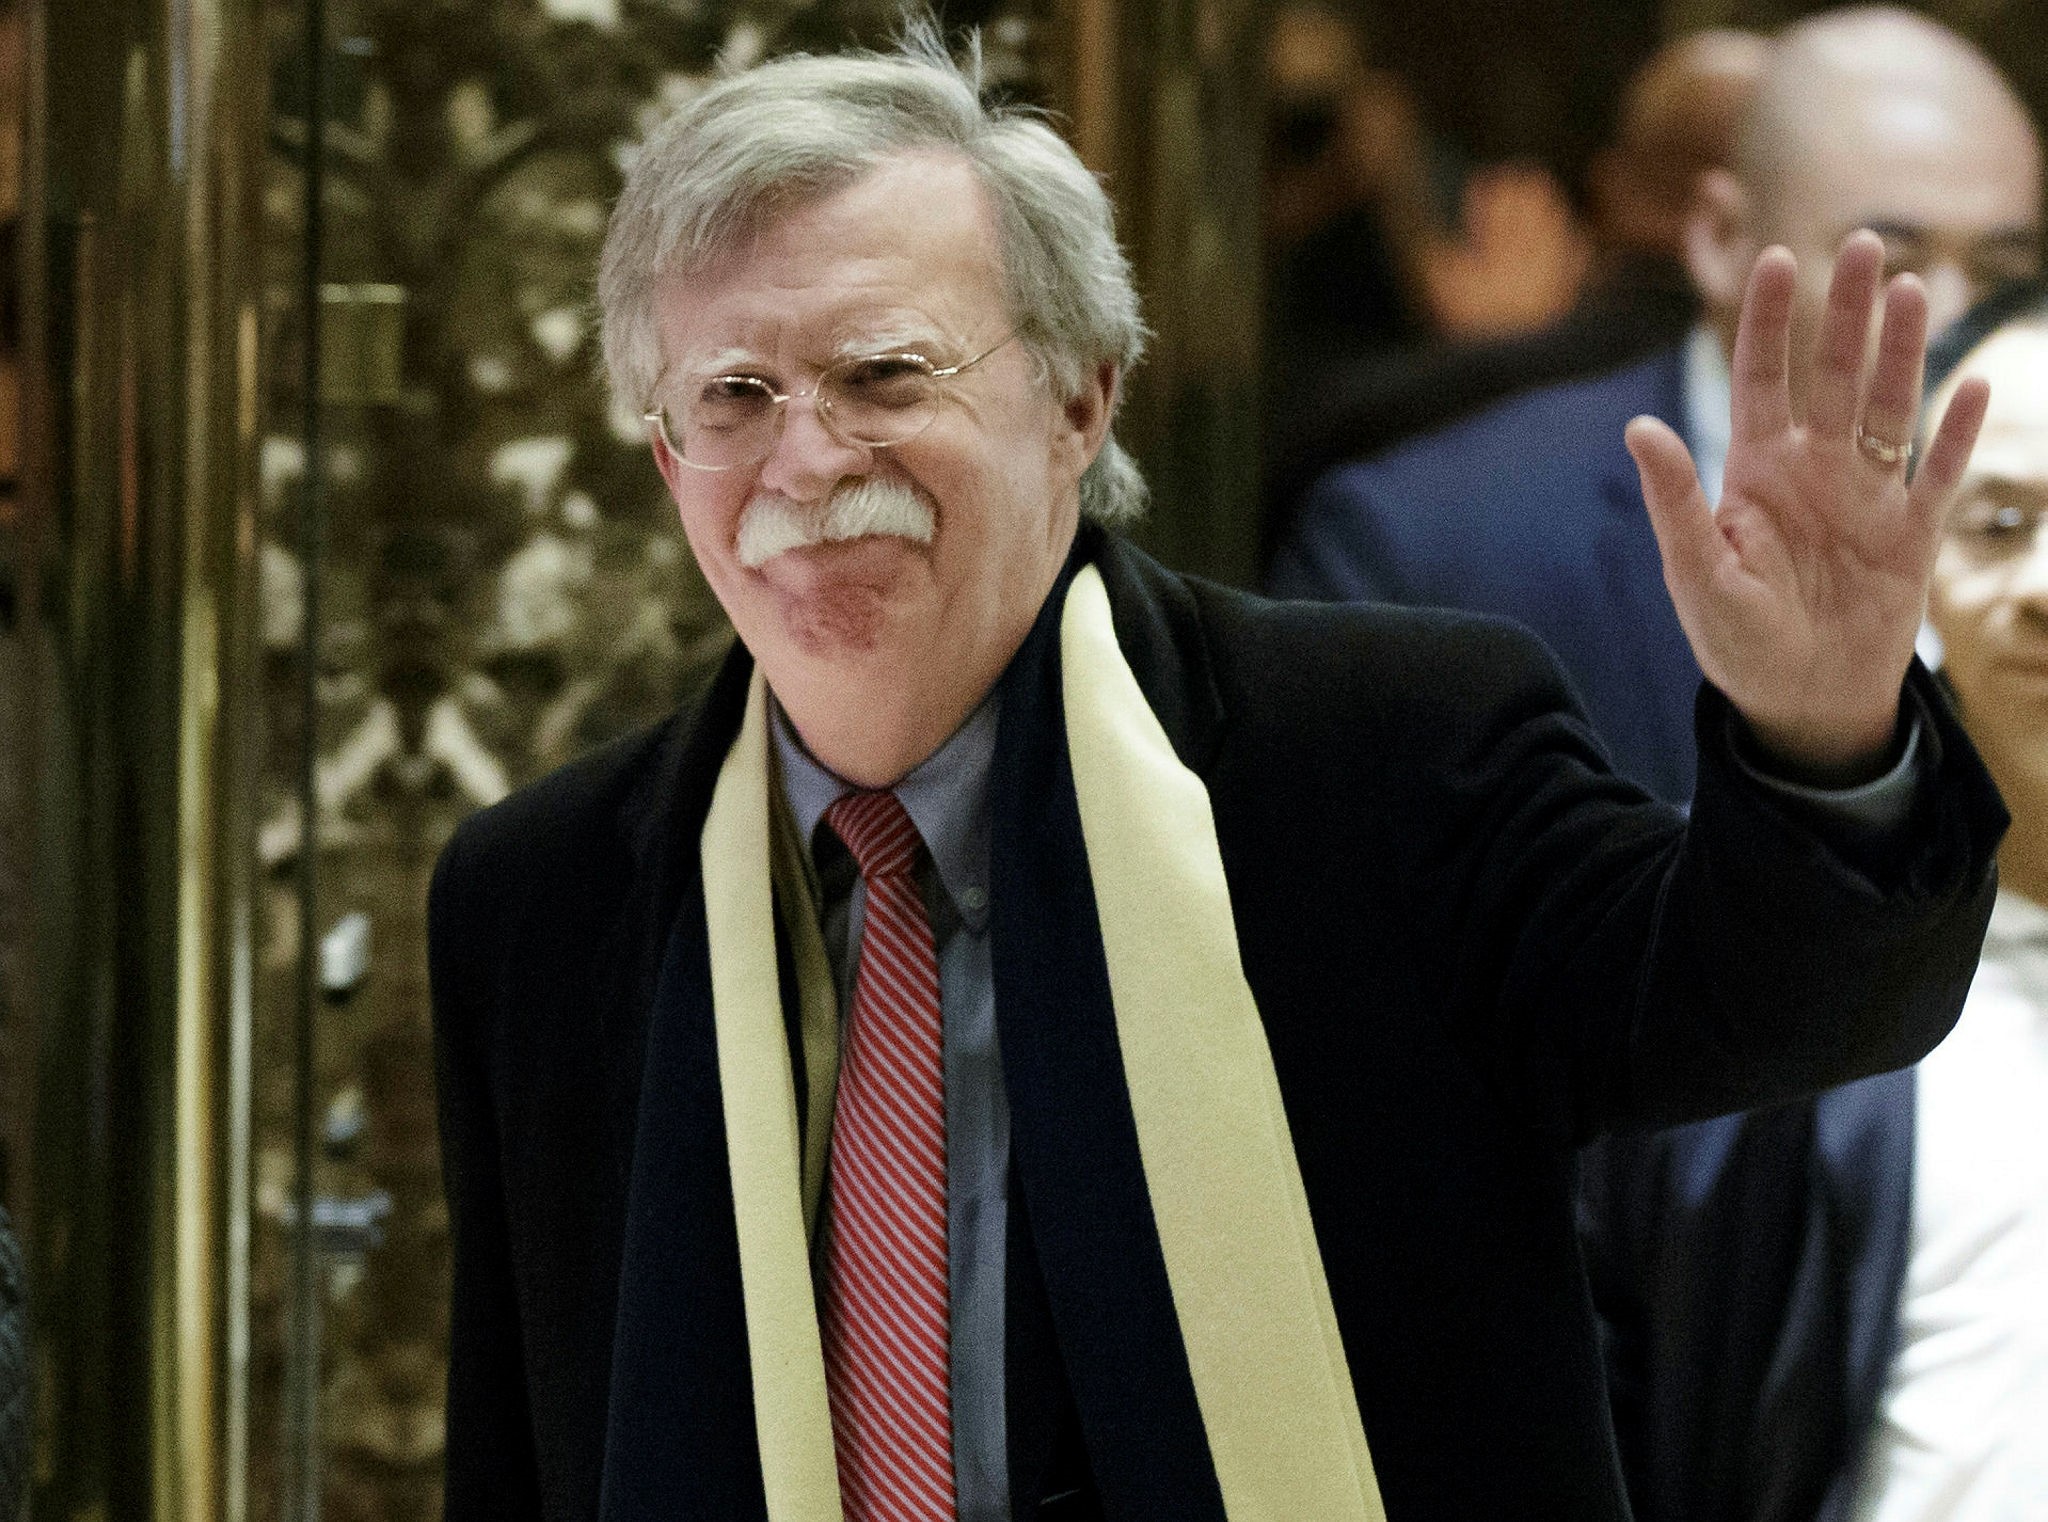 Former U.S. ambassador to the United Nations, John Bolton, was named by U.S. President Trump as his new national security adviser on March 22.